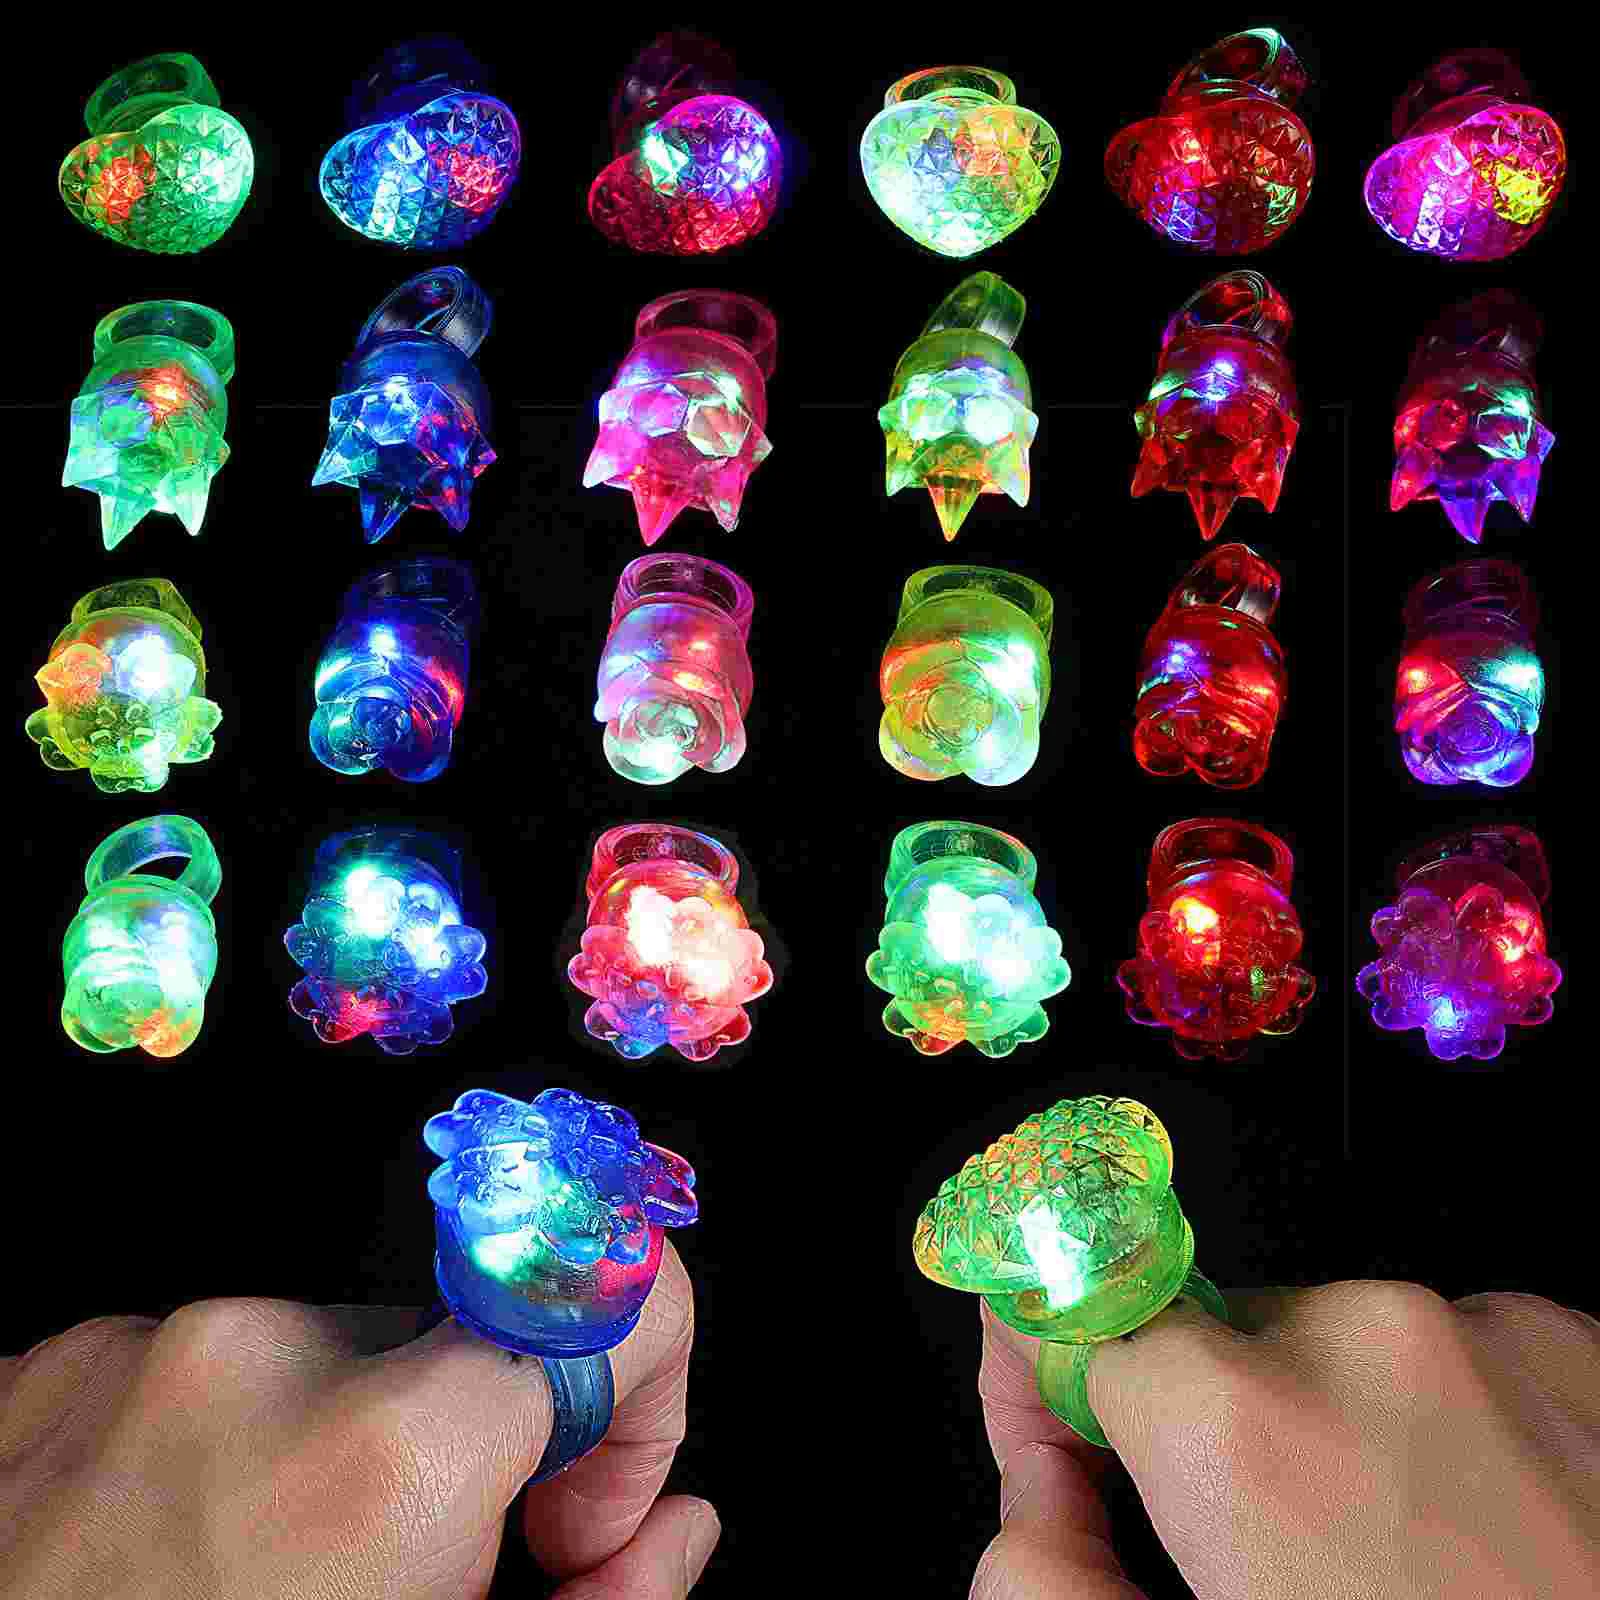 

24 Pcs Light Up Flashing Rings Glow LED Rings Jelly Rings Finger Lights Toys Rave Concert Party Favors